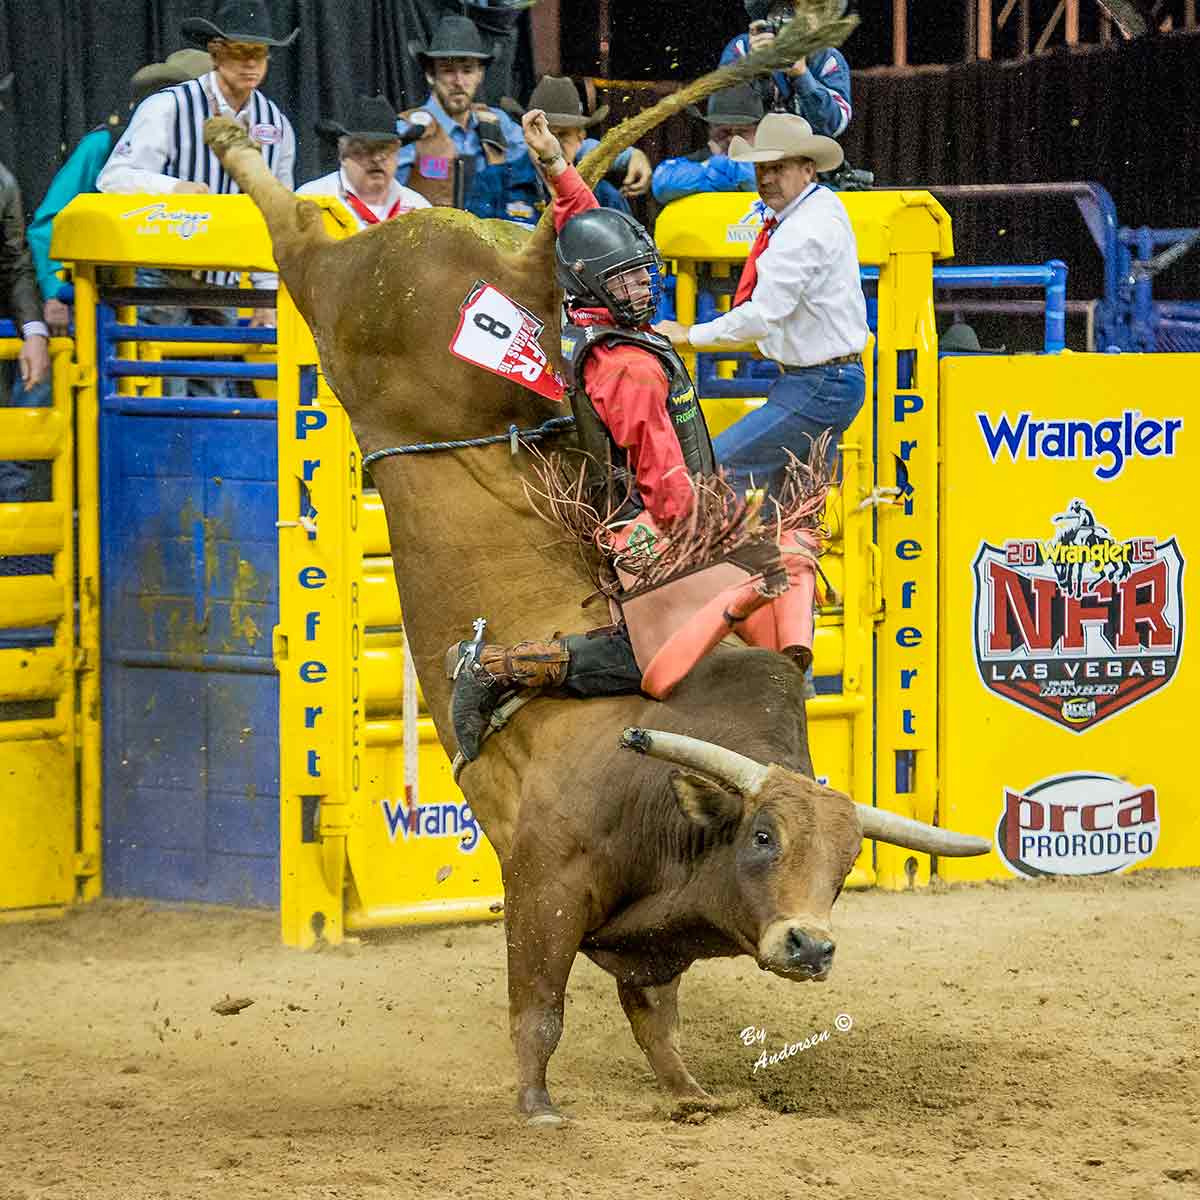 Sage Kimzey, 3X WNFR Qualifier and 2X World Champion Bull Rider at the 2016 Wrangler NFR in Las Vegas